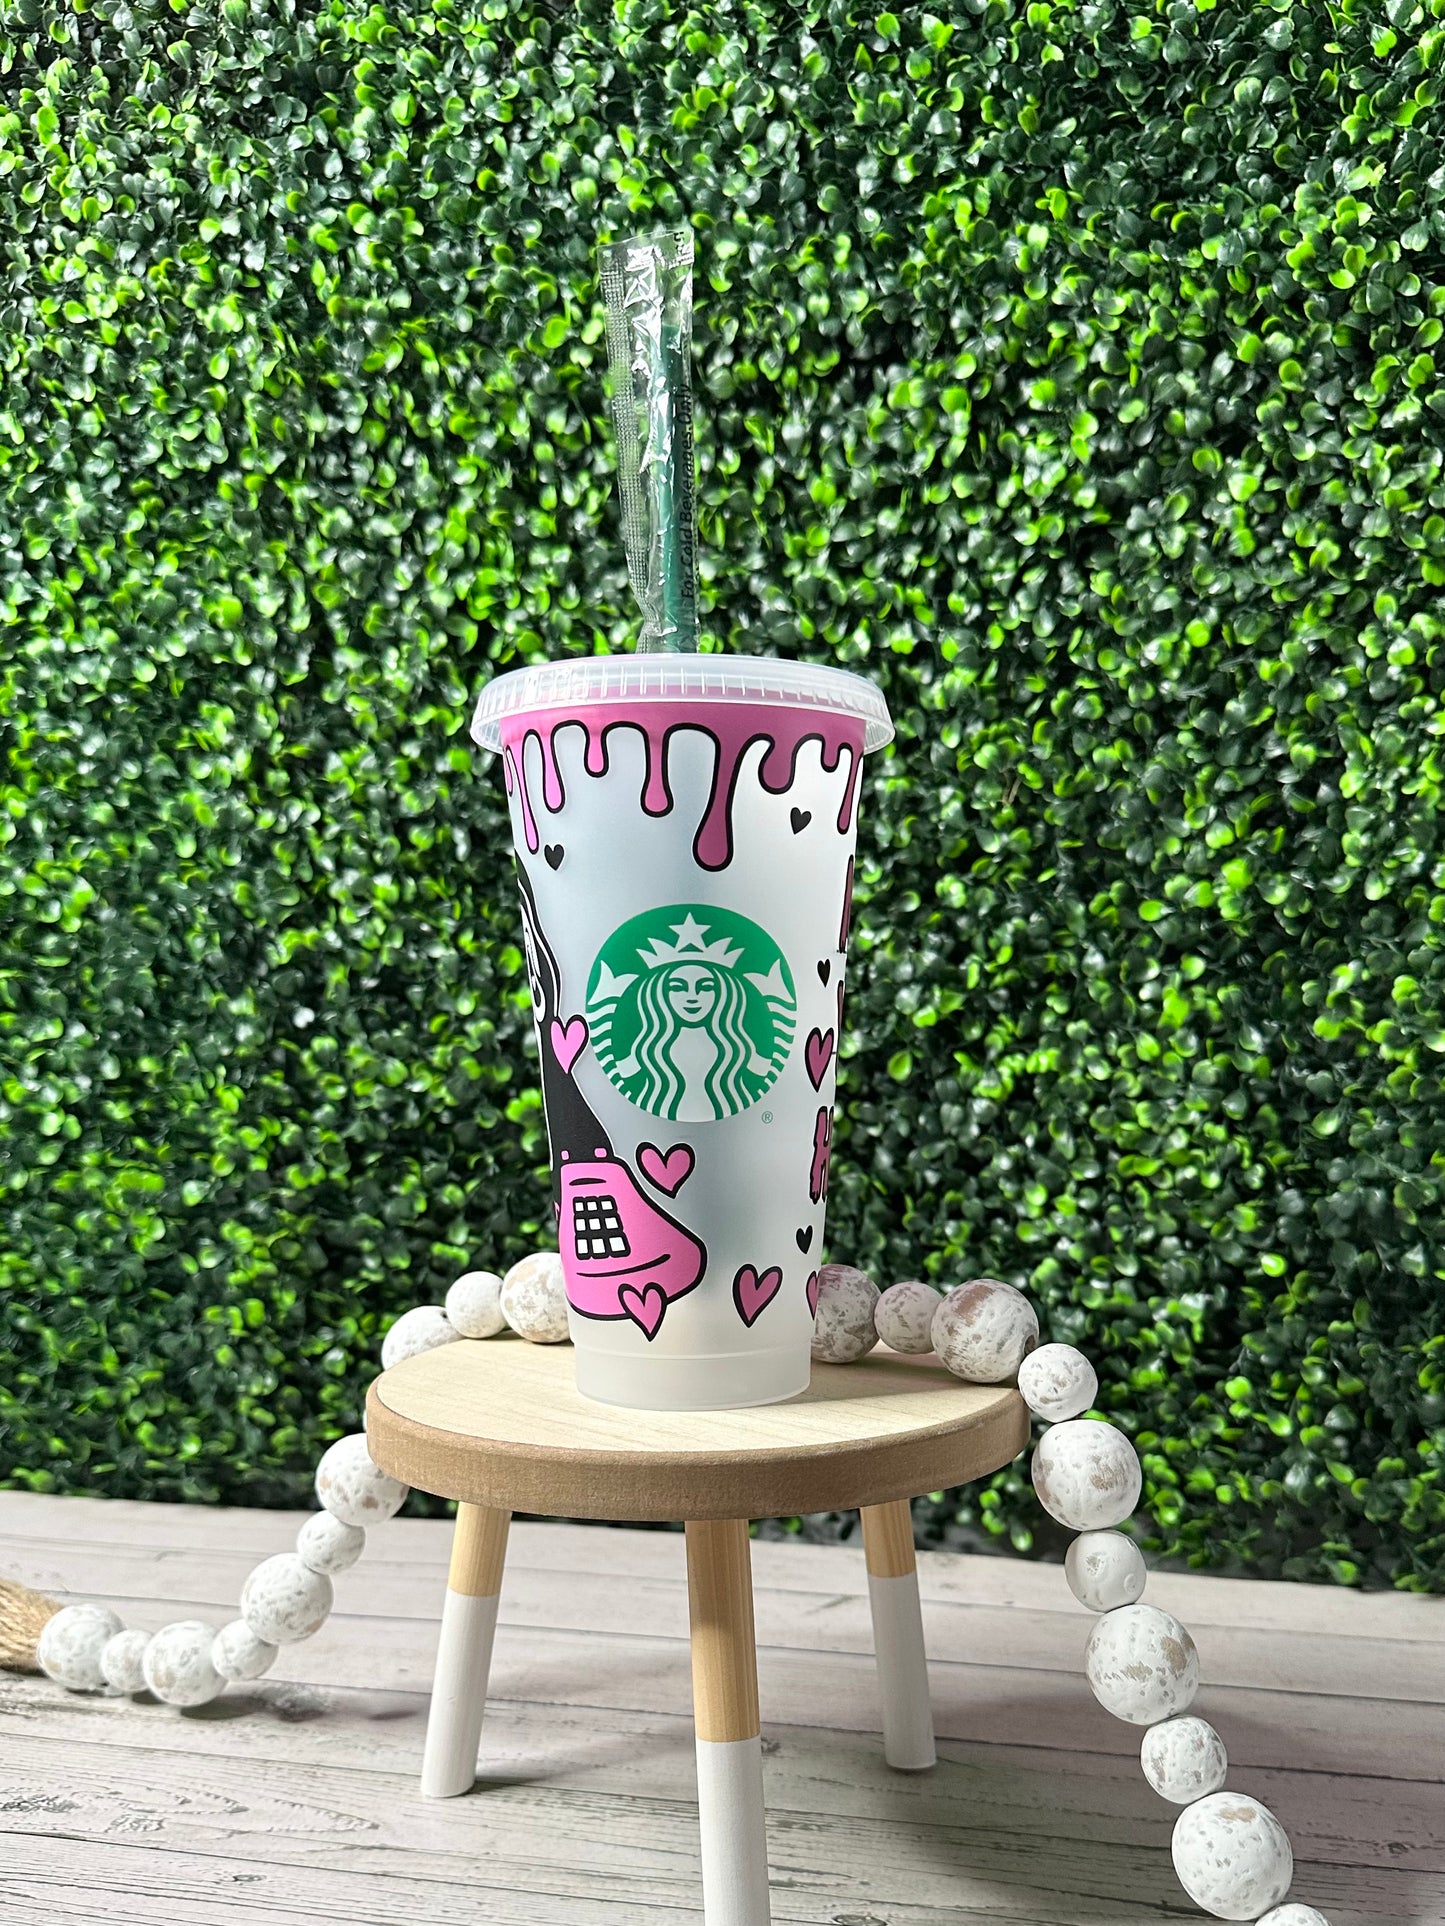 No You Hang Up Venti Cold Cup - Willow Love Bug Designs 